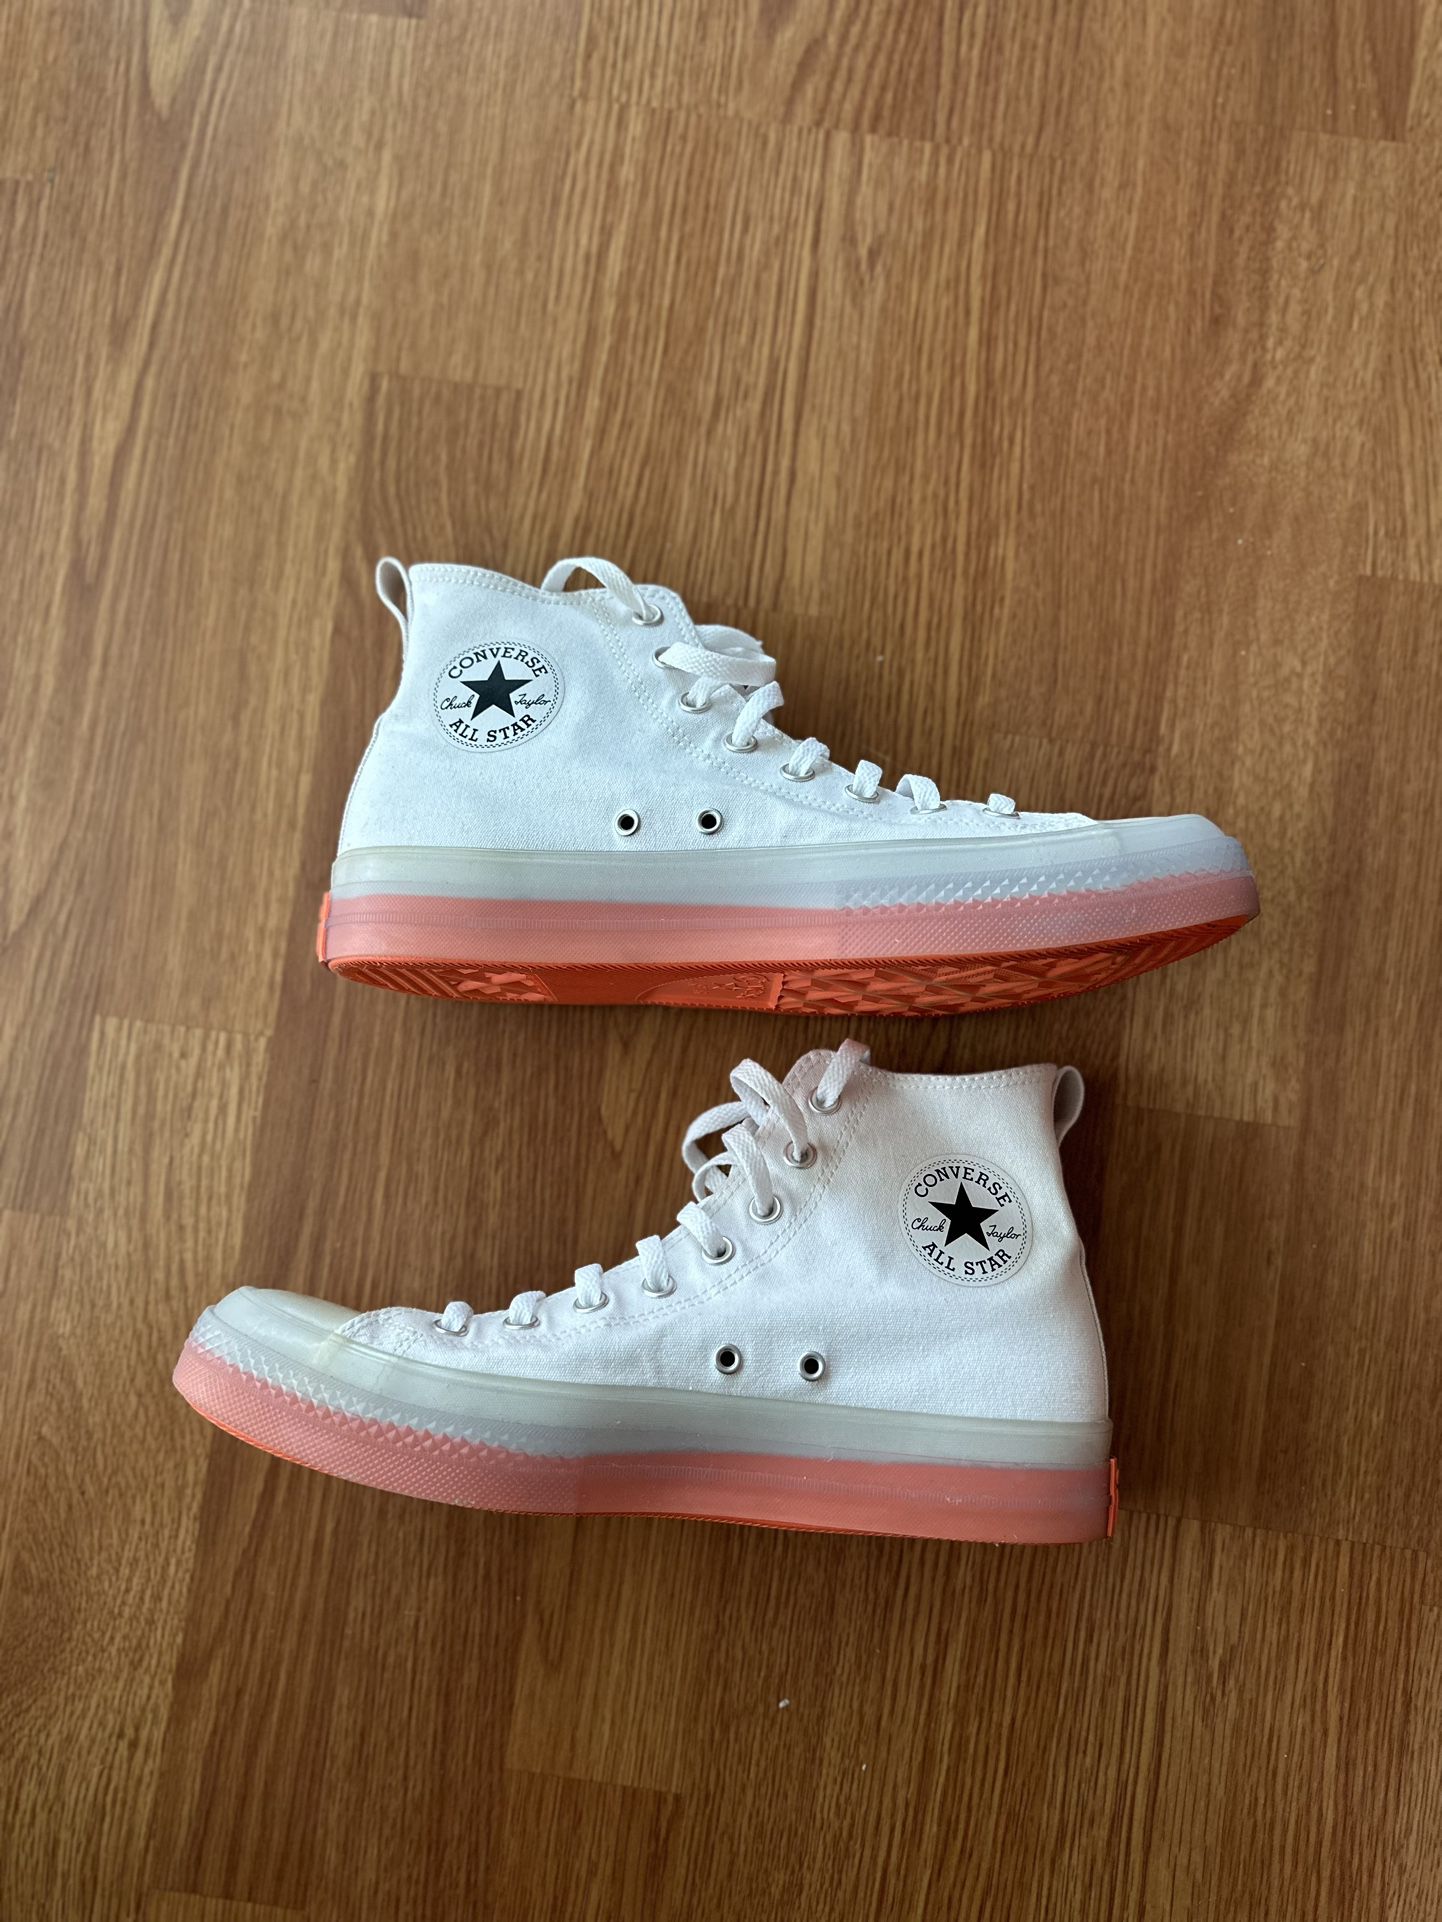 All Star Converse - White / Salmon Bottoms Limited Edition 